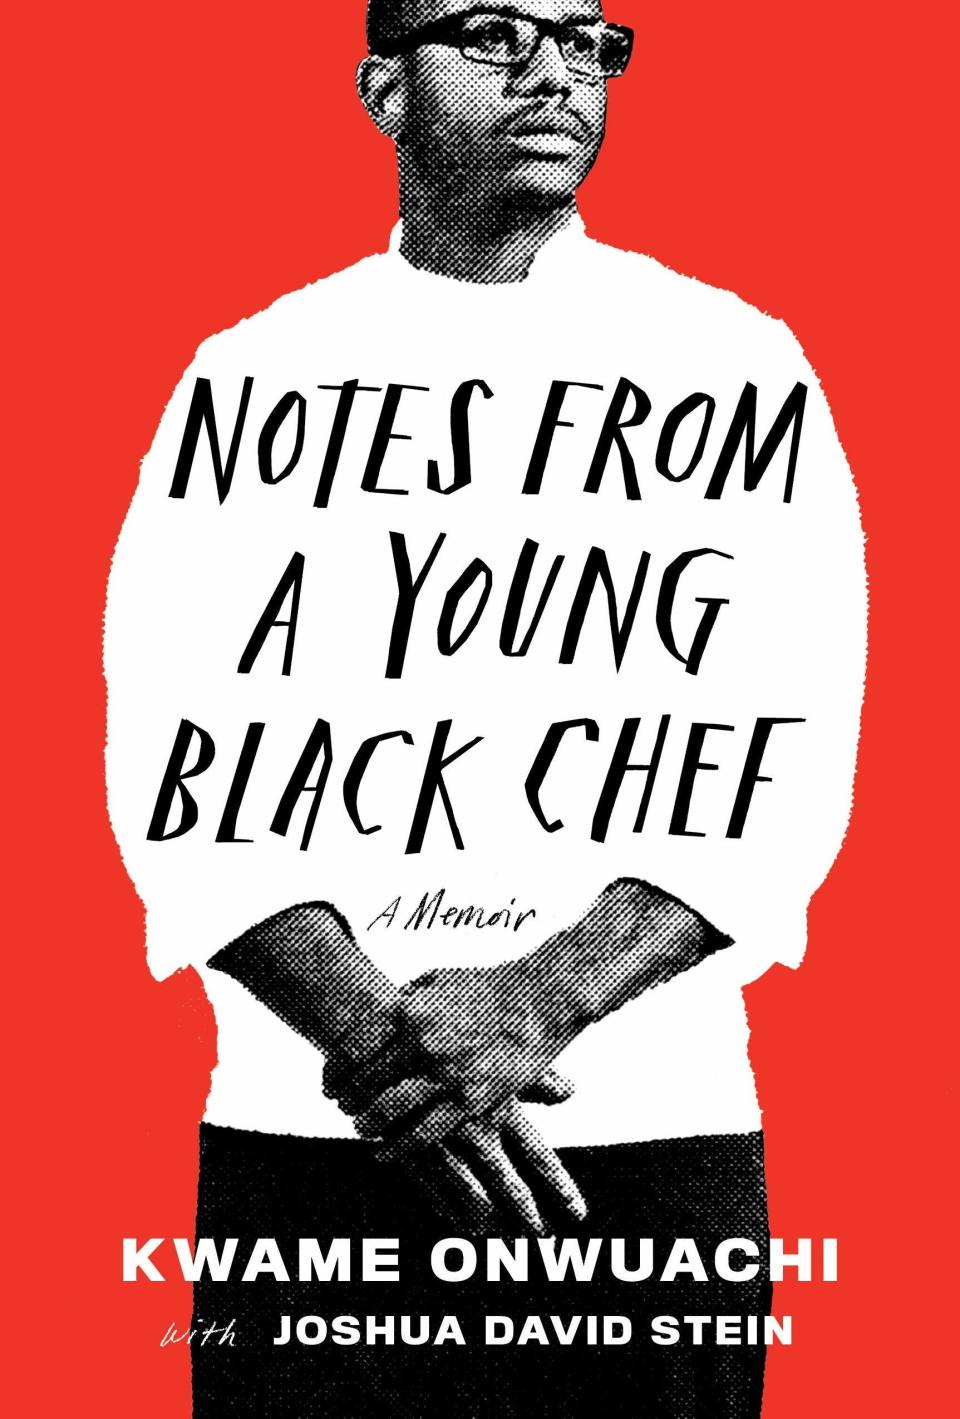 Chef Kwame Onwuachi shares his road to an impressive food career by his late twenties. Raised in the Bronx and Nigeria, Kwame competed in Top Chef, cooked in the White House, and opened (and closed) one of the finest restaurants in the US. In this memoir, he delves into his wins and the struggles of being a Black chef and being forced to close a restaurant he poured his heart into.Get it from Bookshop or through your indie bookstore through Indiebound here. 